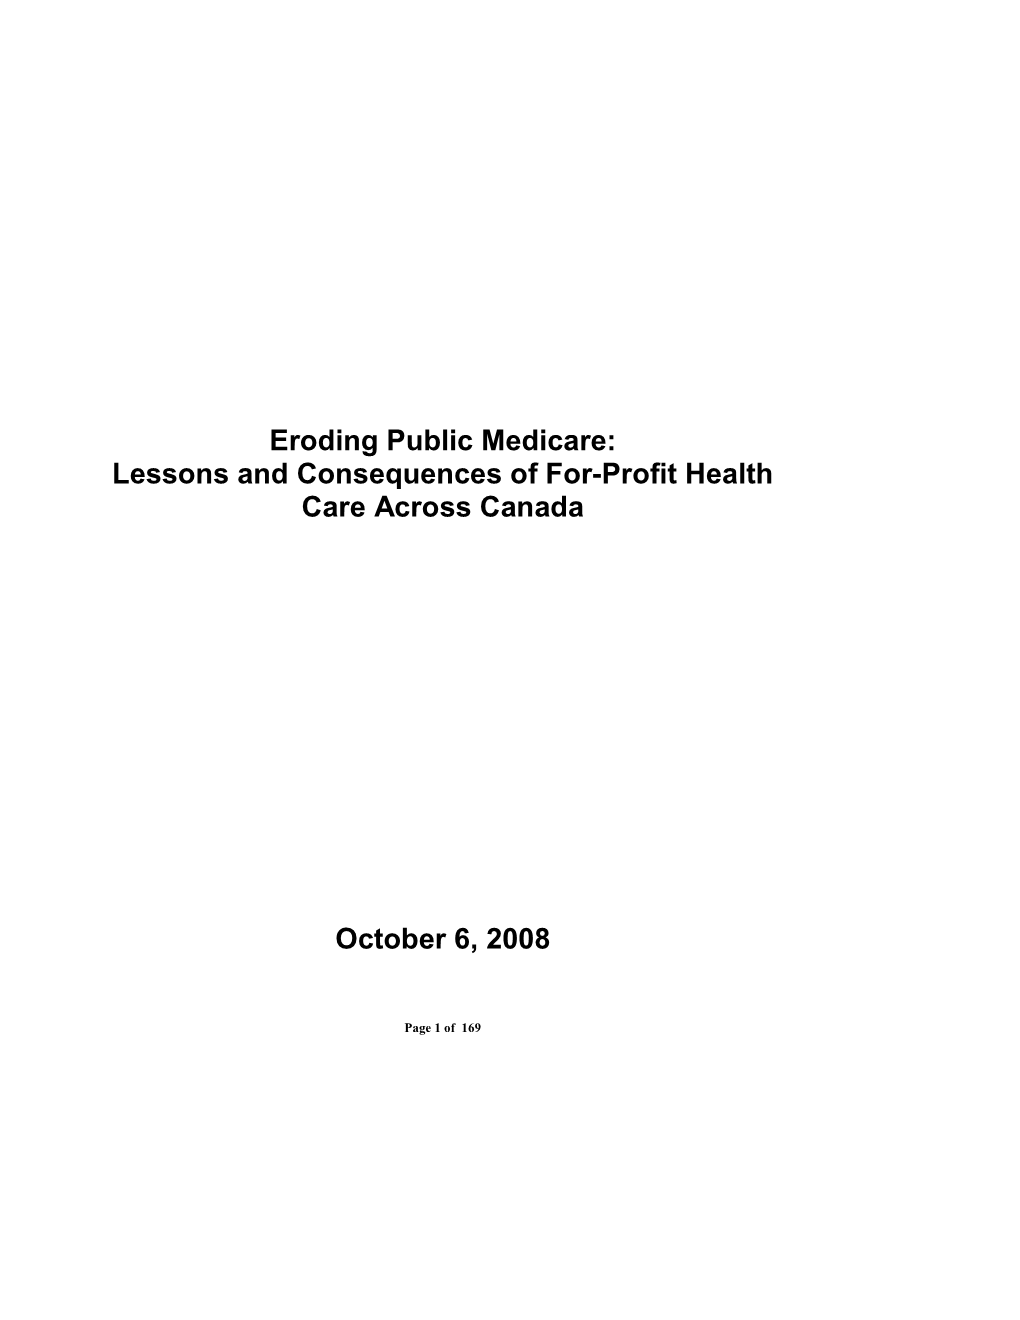 Lessons and Consequences of For-Profit Health Care Across Canada